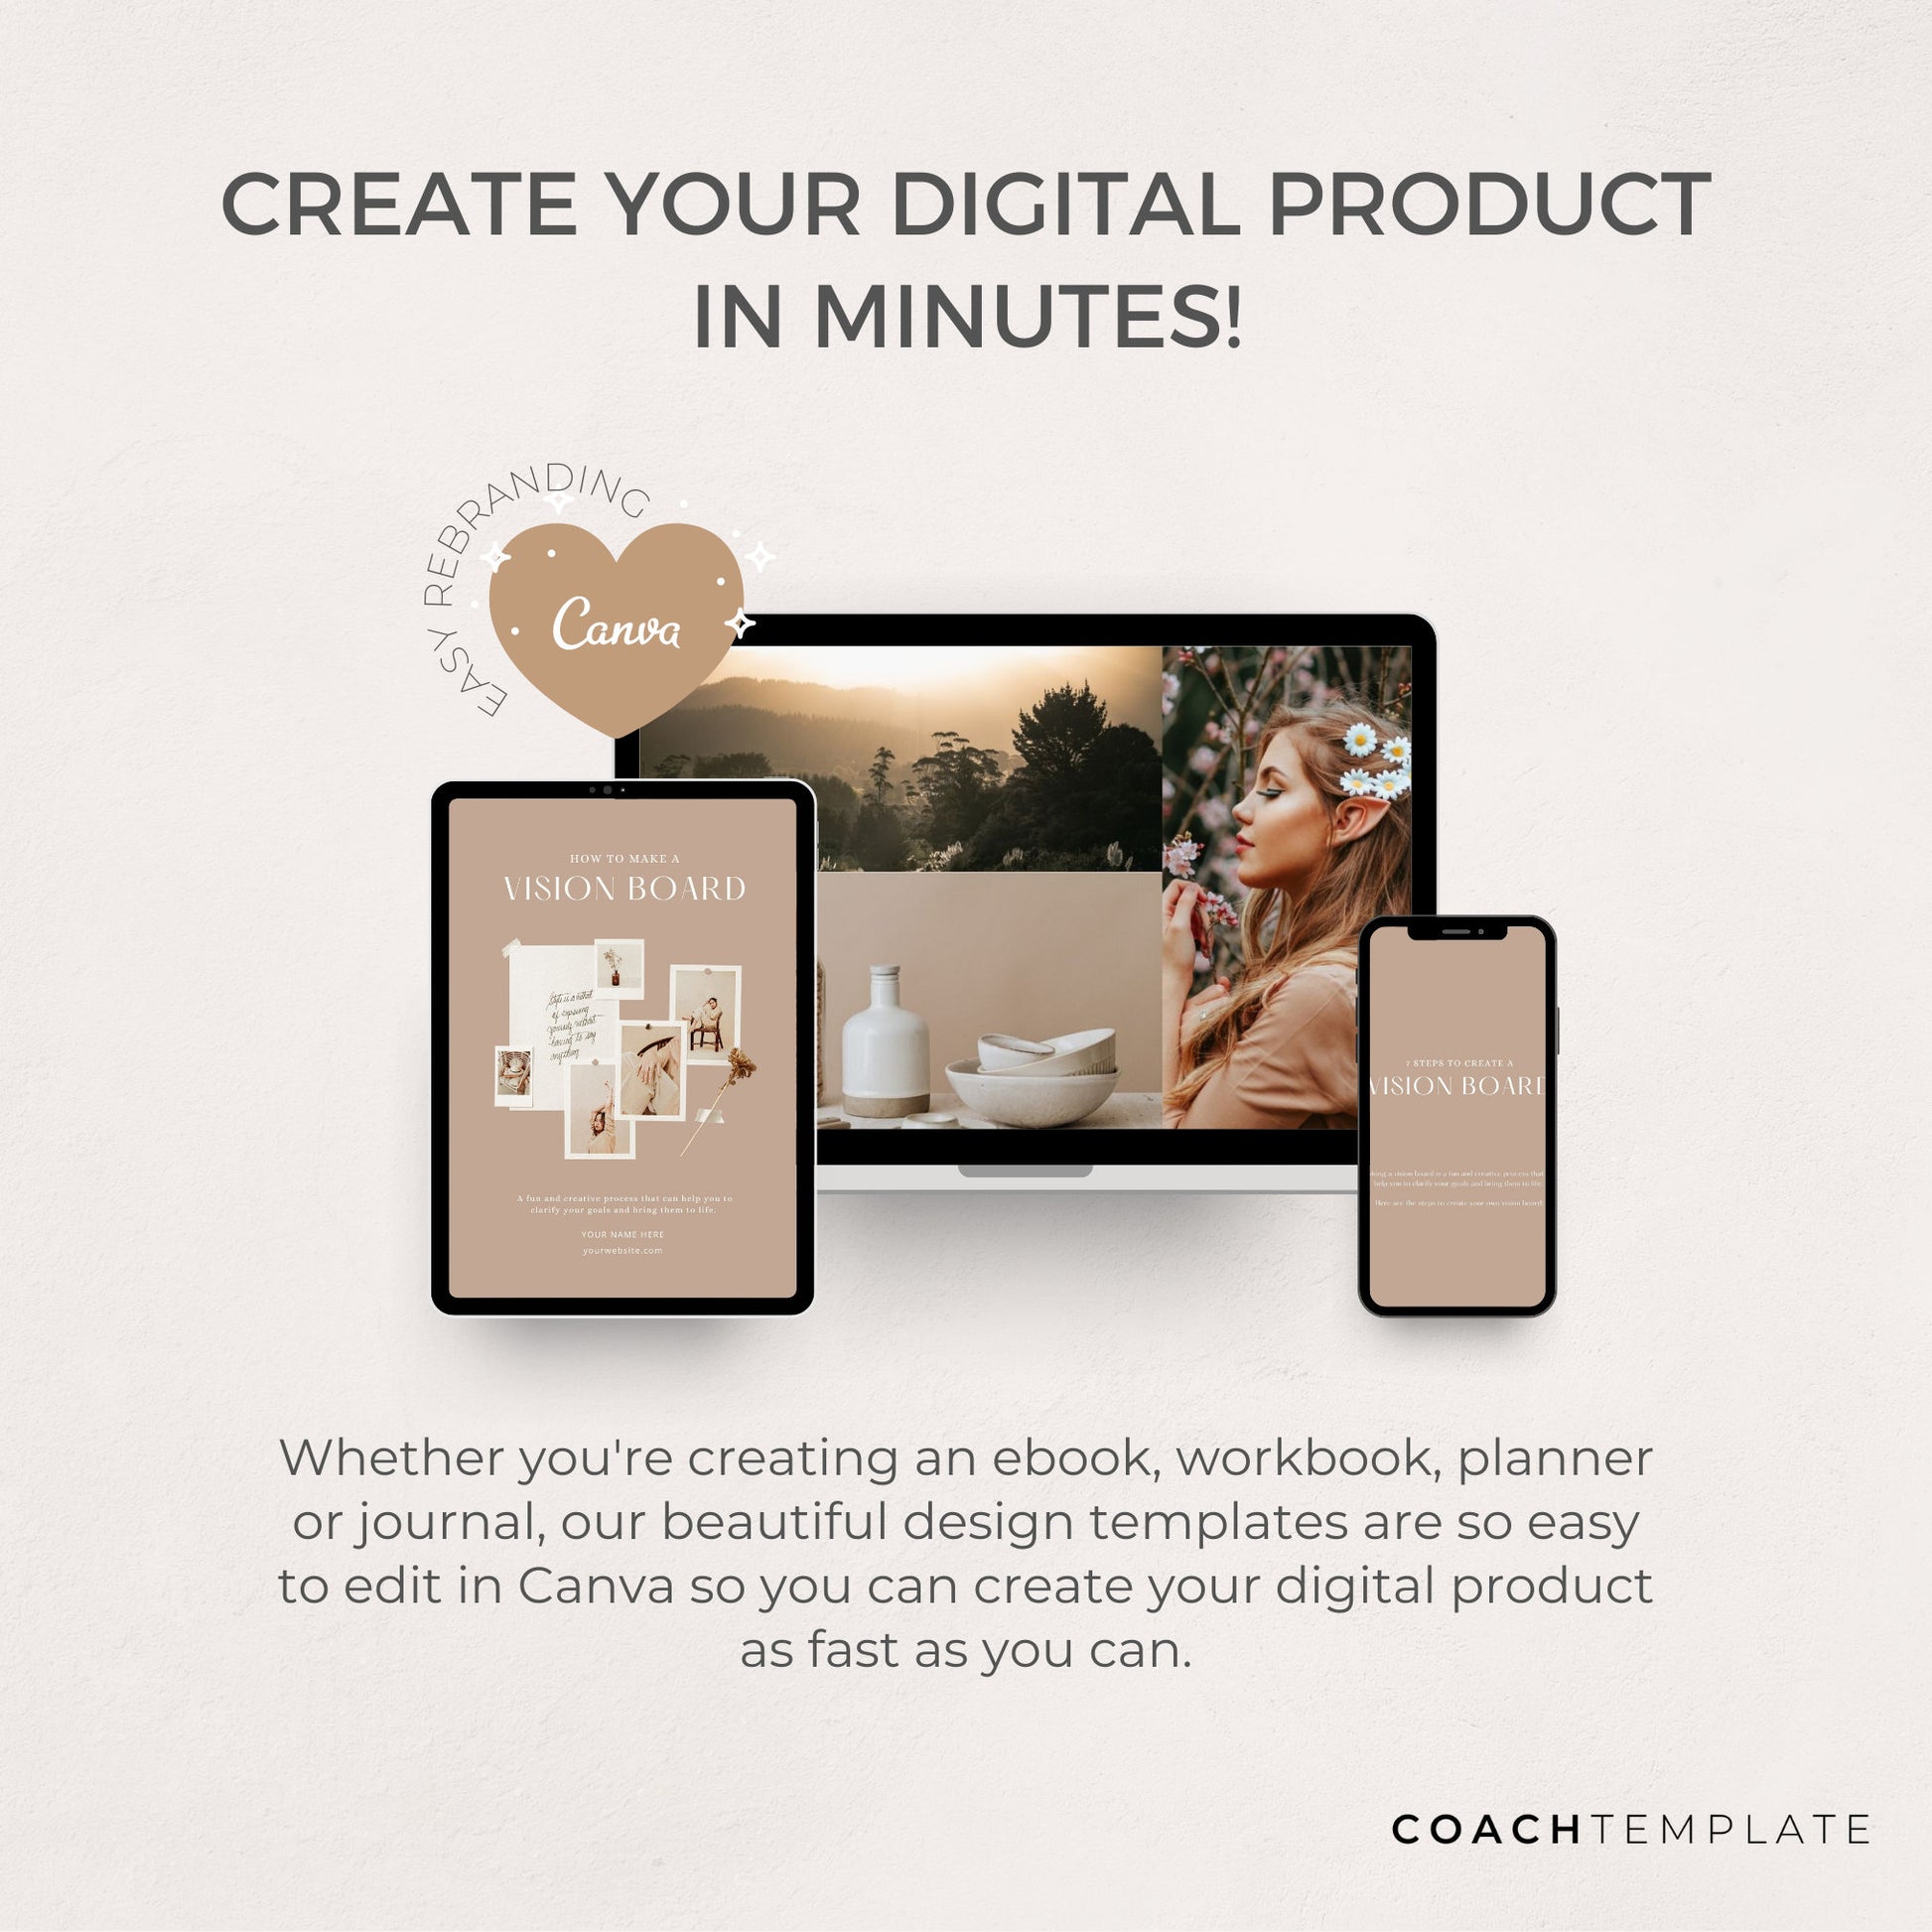 Create a Vision Board eBook Workbook Template Canva with Done-for-You Content | Manifesting Mindset Life Coach Small Business Commercial Use

CoachTemplate.com CT058